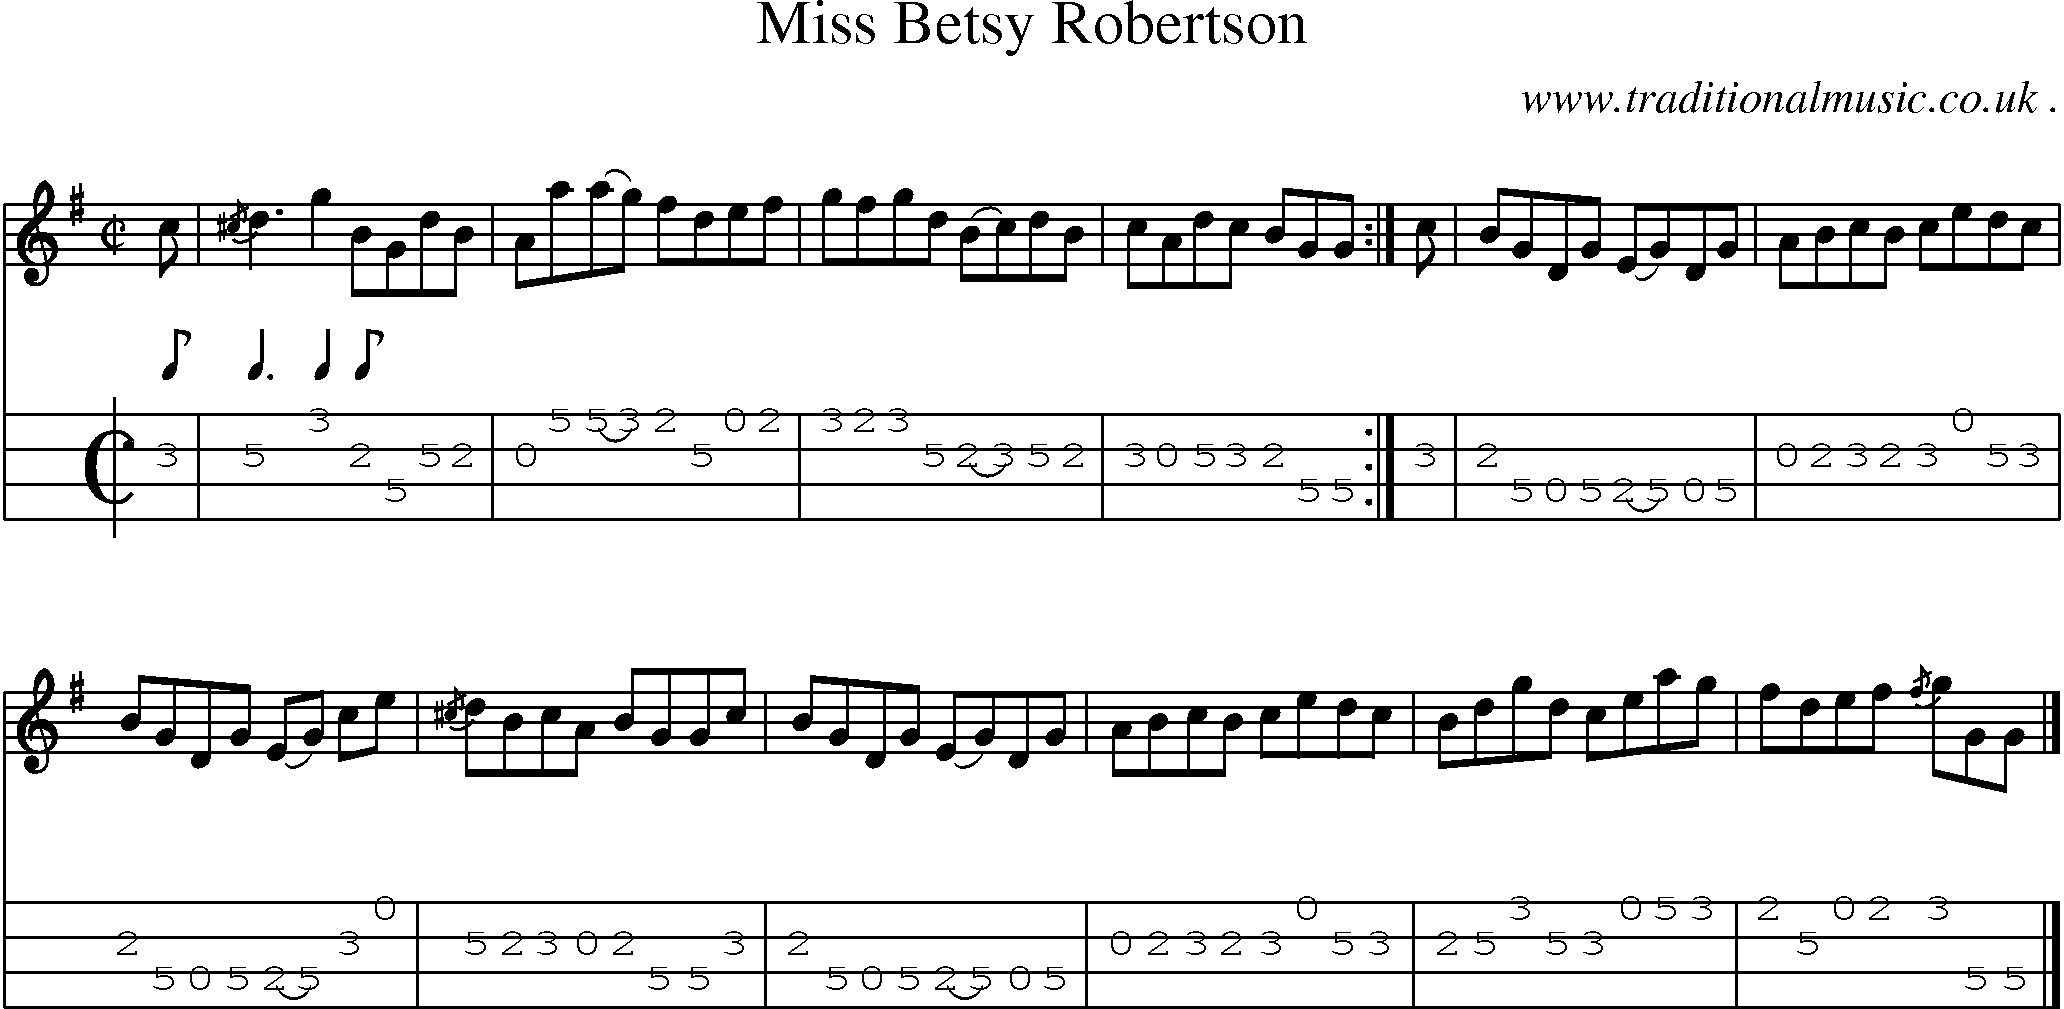 Sheet-music  score, Chords and Mandolin Tabs for Miss Betsy Robertson